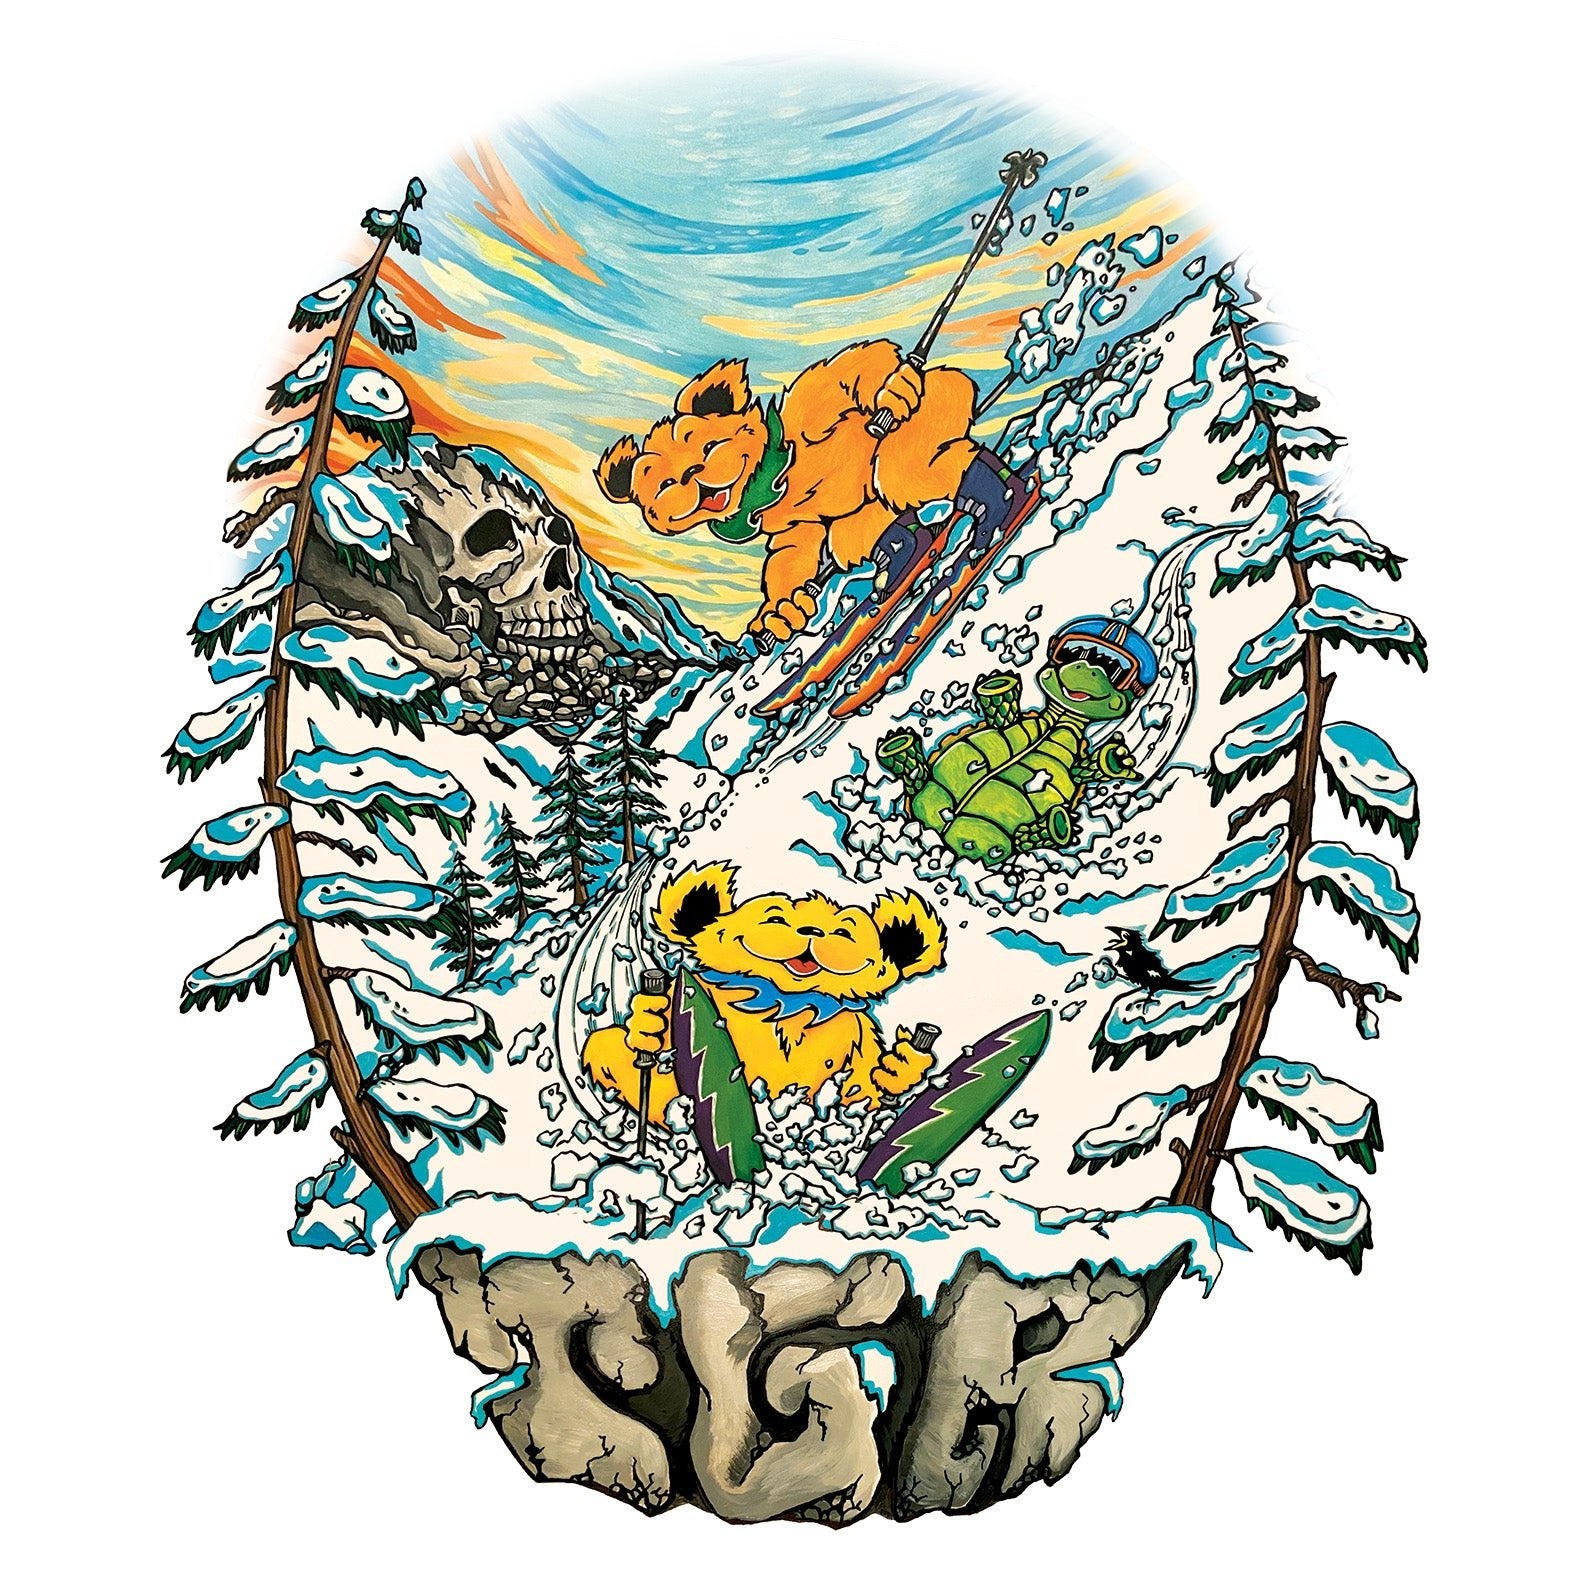 CLOSEUP of FRONT: Artwork is alpenglow sky with two Grateful Dead Bears (1 orange, 1 yellow) skiing with a Terrapin Turtle sliding down the hill on it's back. The scene is bordered by two snow covered pine trees and has TGR stone lettering on bottom border. Grateful Dead Iconography is mixed into the scene with Bolt skis and Skull cliffs.